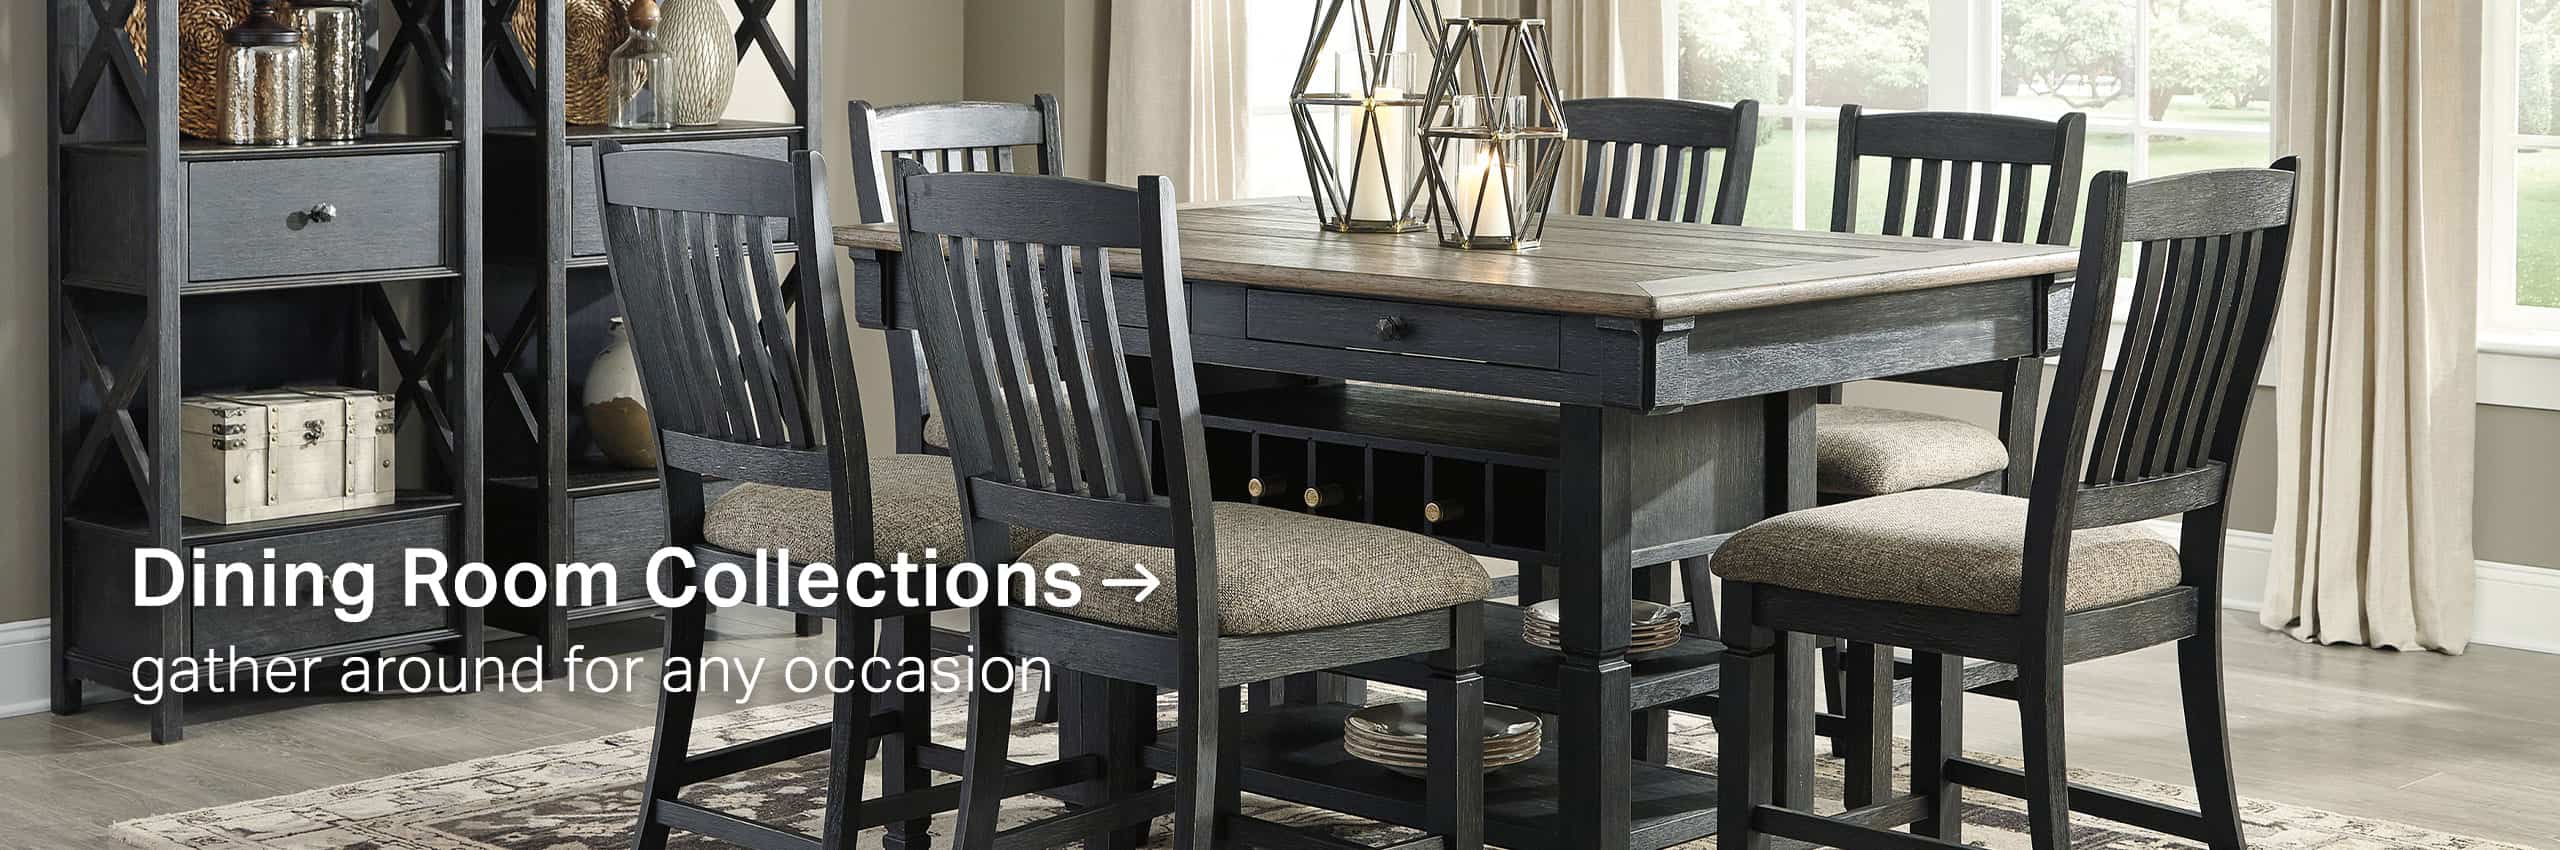 Dining Room Collections – gather around for any occasion